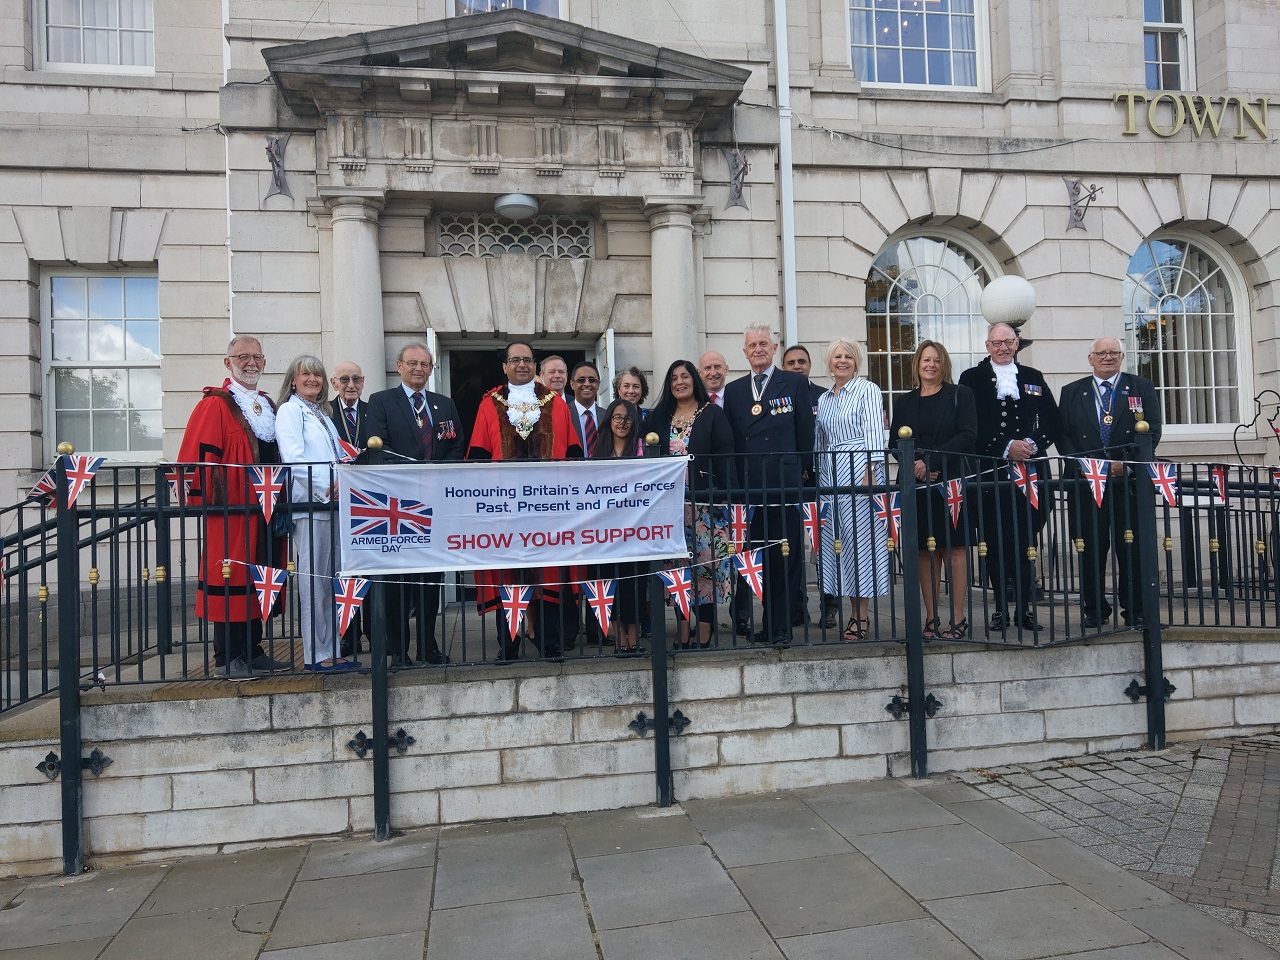 The Mayor and dignitaries outside the Town Hall